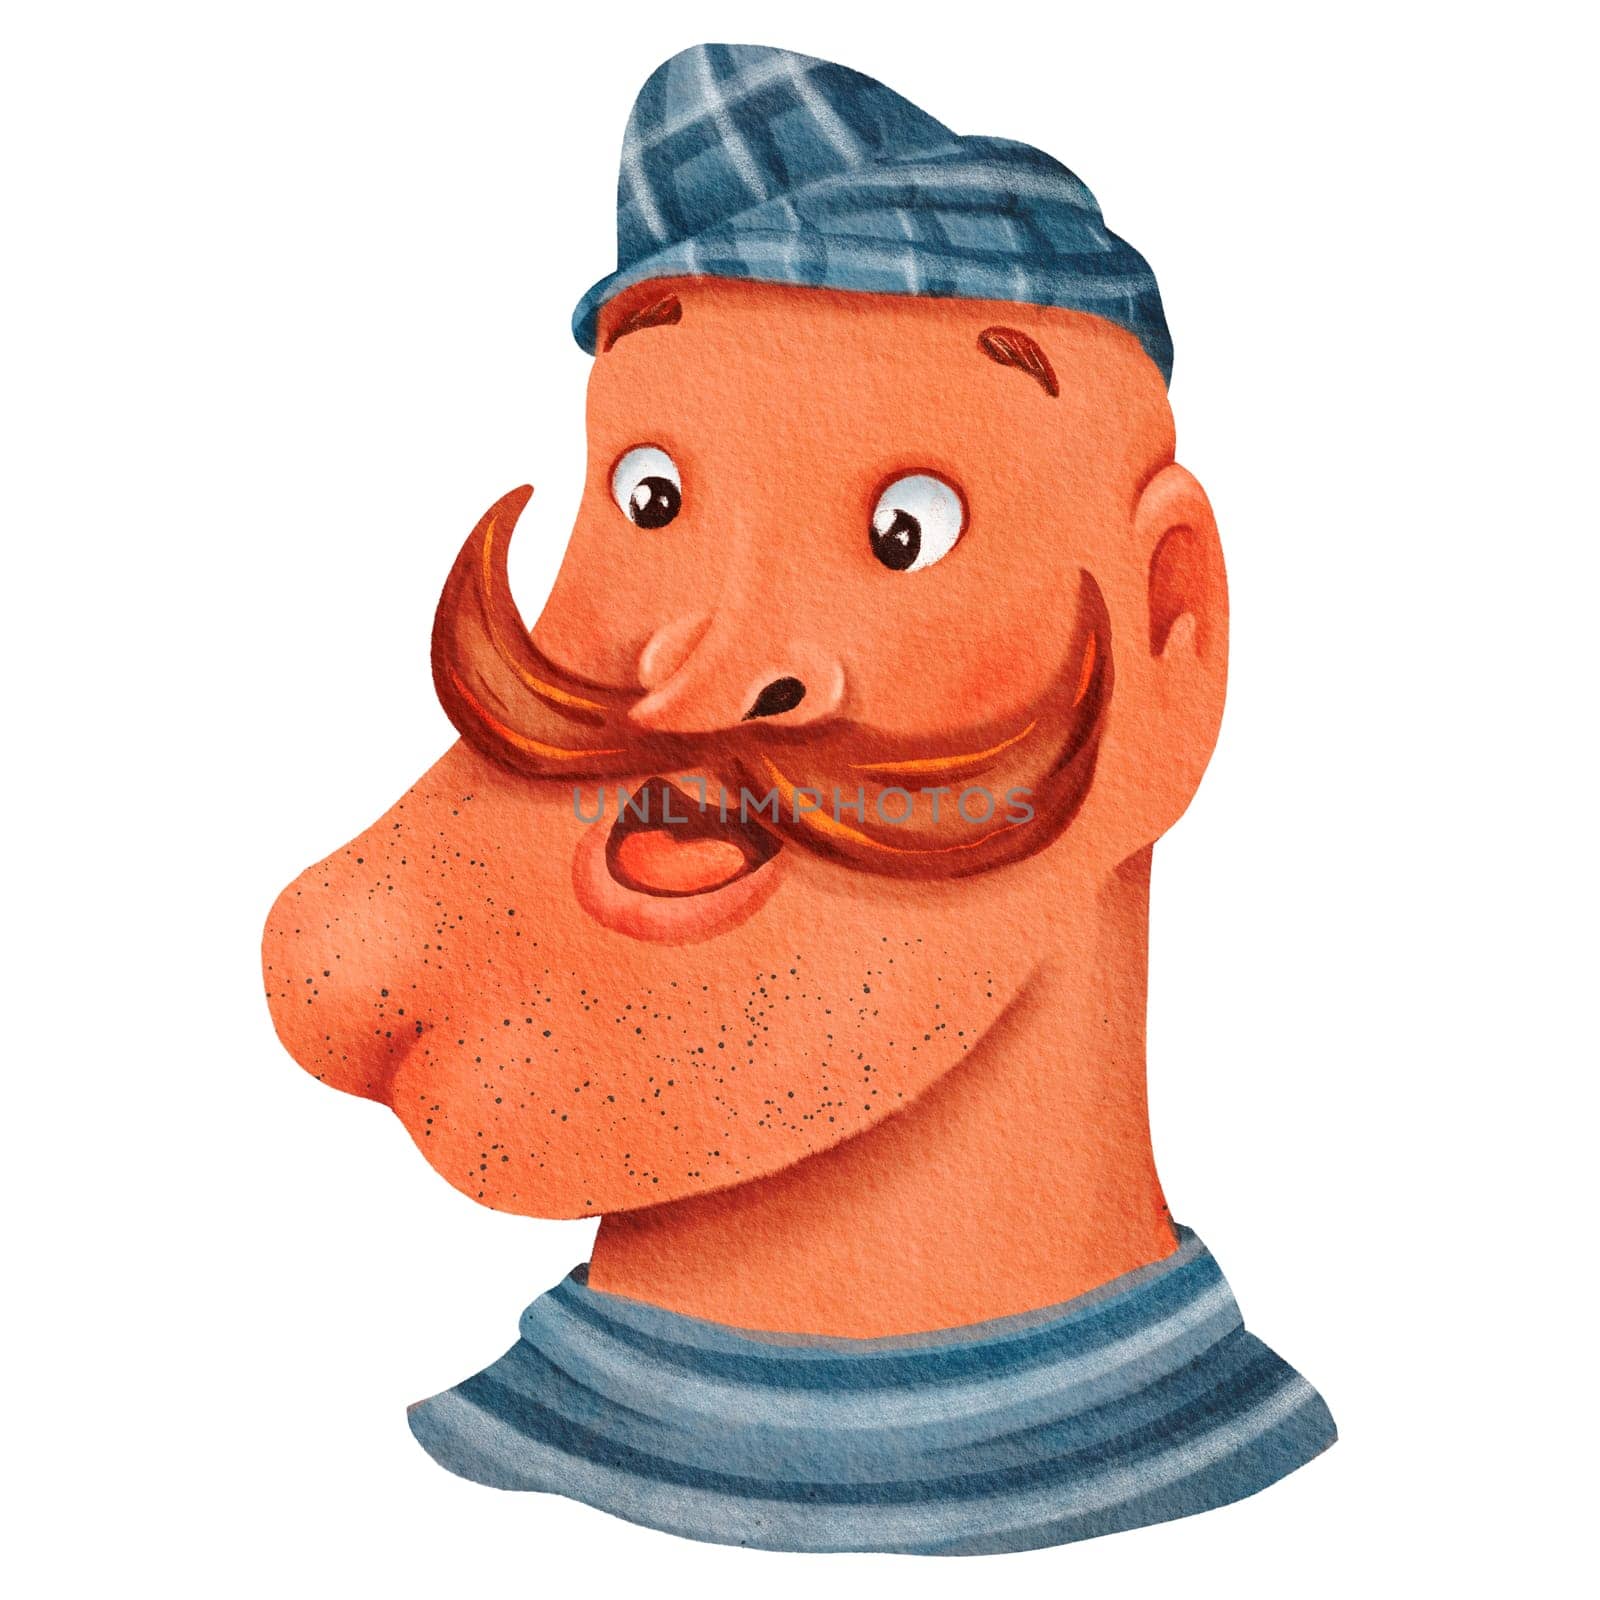 An illustrated cartoon character with a cone-shaped hat, a mustache, and a striped shirt. The headgear and gesture are part of the costume art of this fictional vertebrate toy.